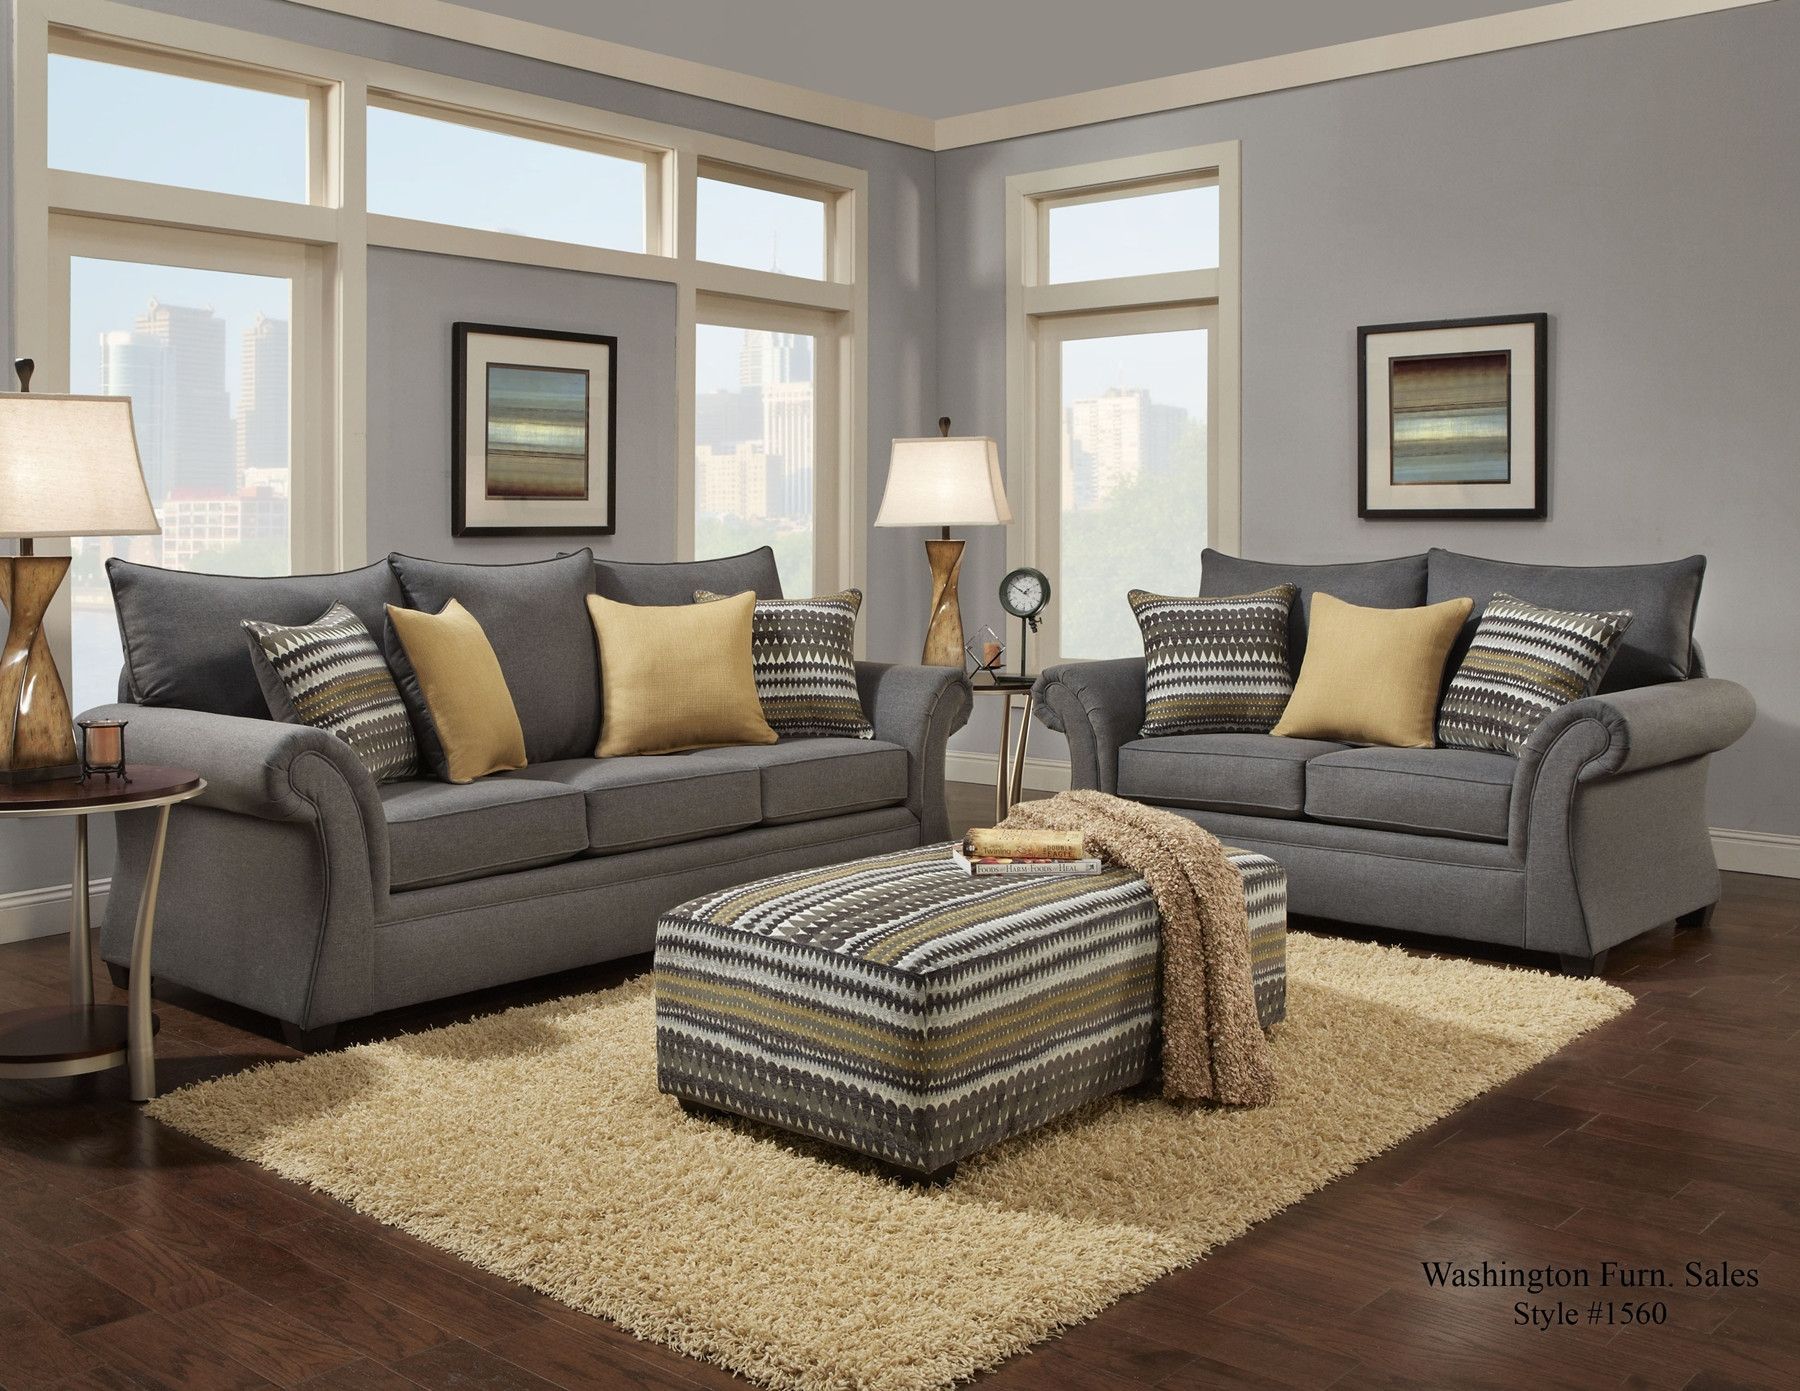 Popular Furniture Styles For Living Rooms